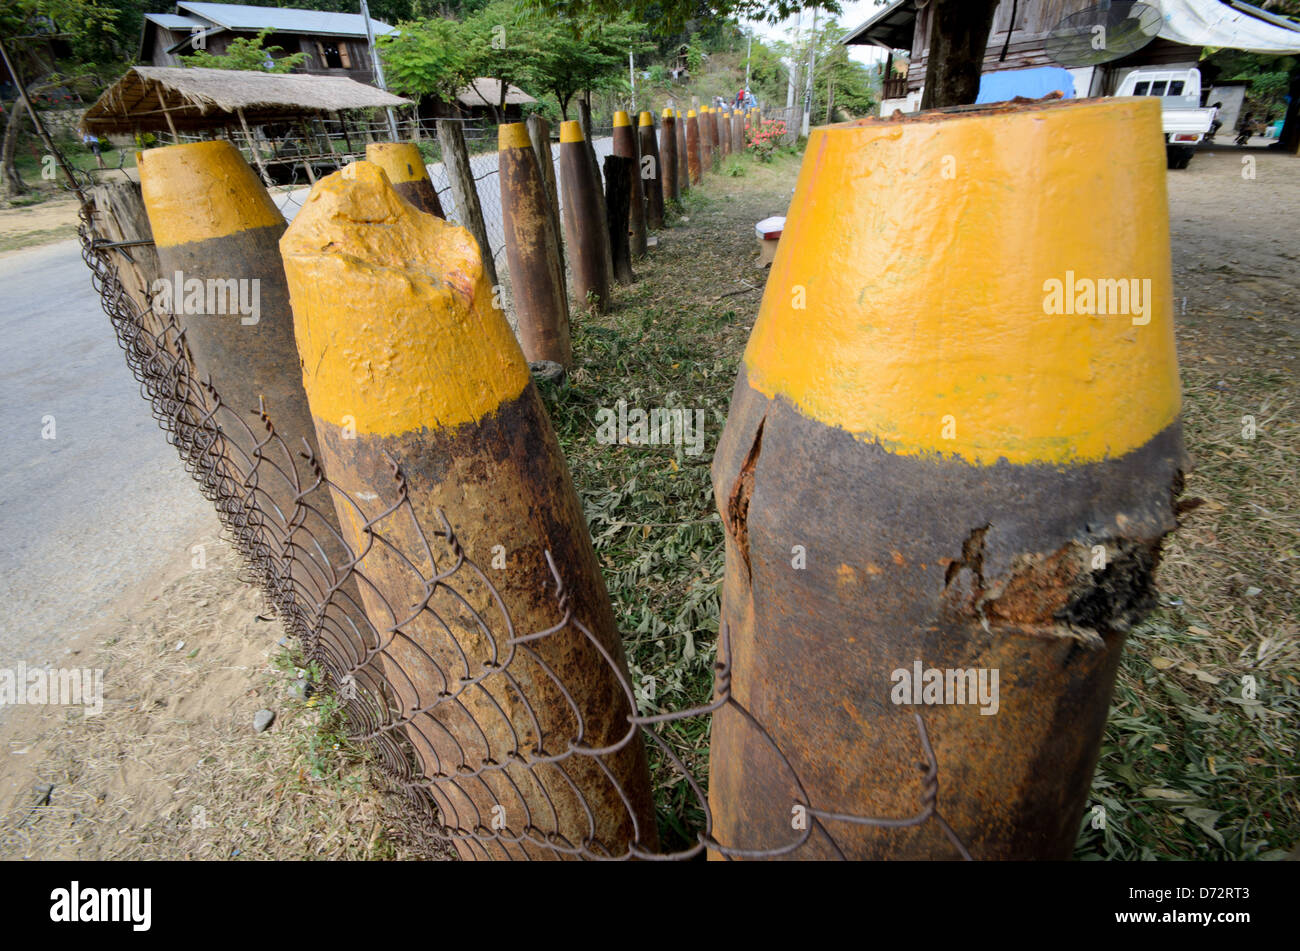 Unexploded munitions left over from the Vietnam War are used as fence posts in a village in the Plain of Jars, Laos, known as Bomb Village. Stock Photo